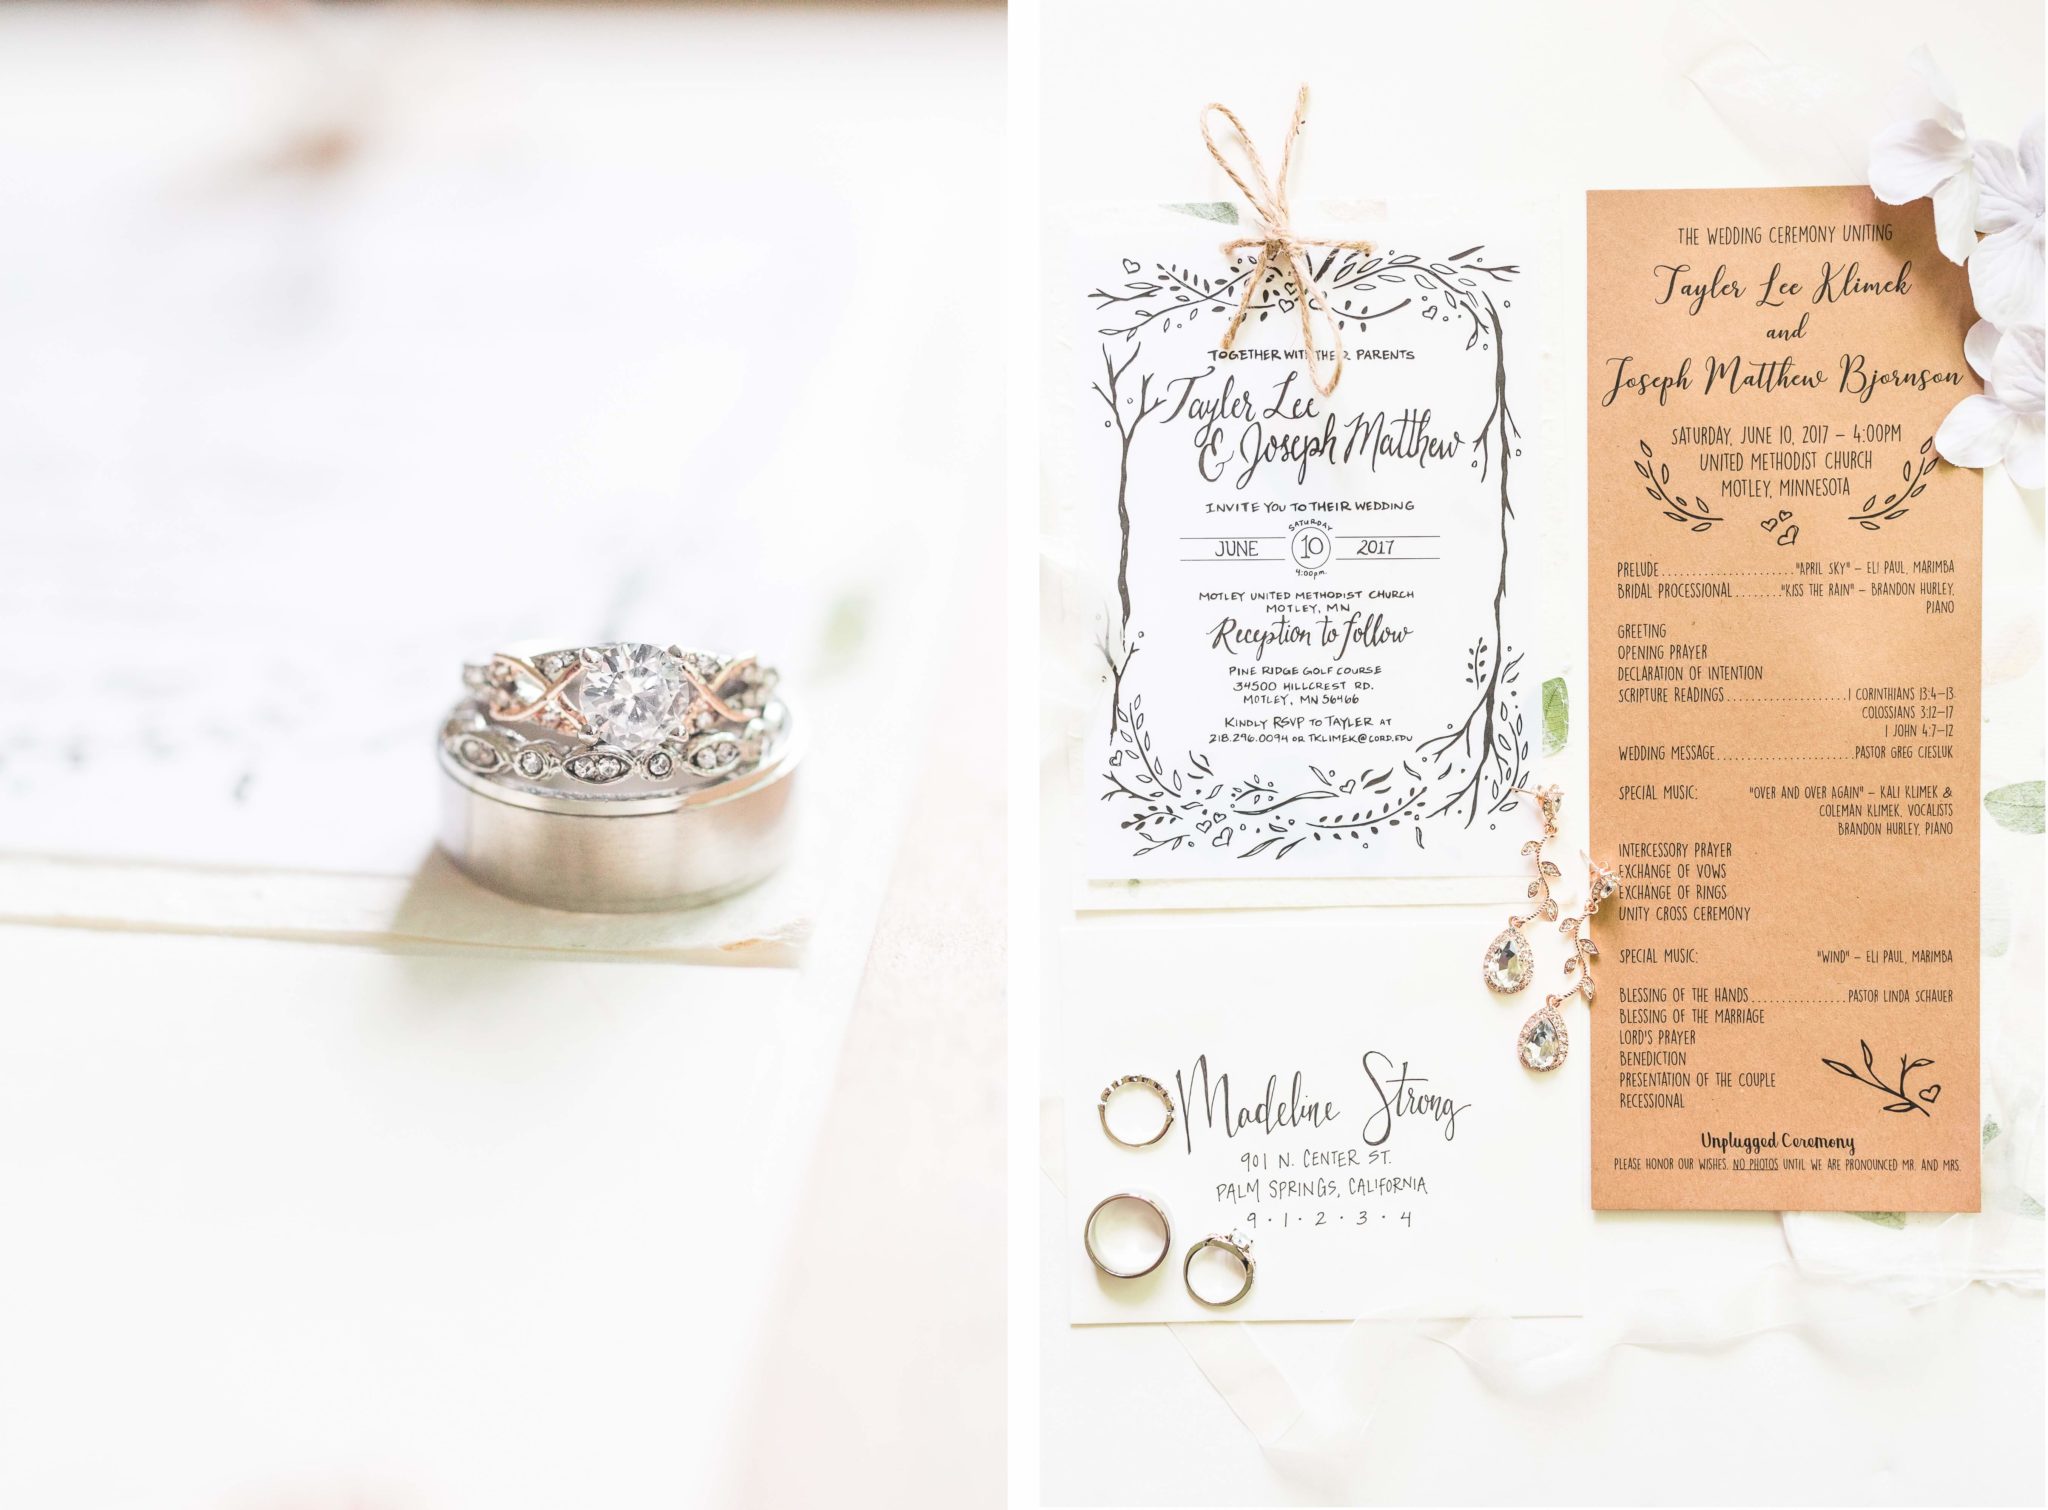 A hand written wedding invitation suite and jewelry on a white table